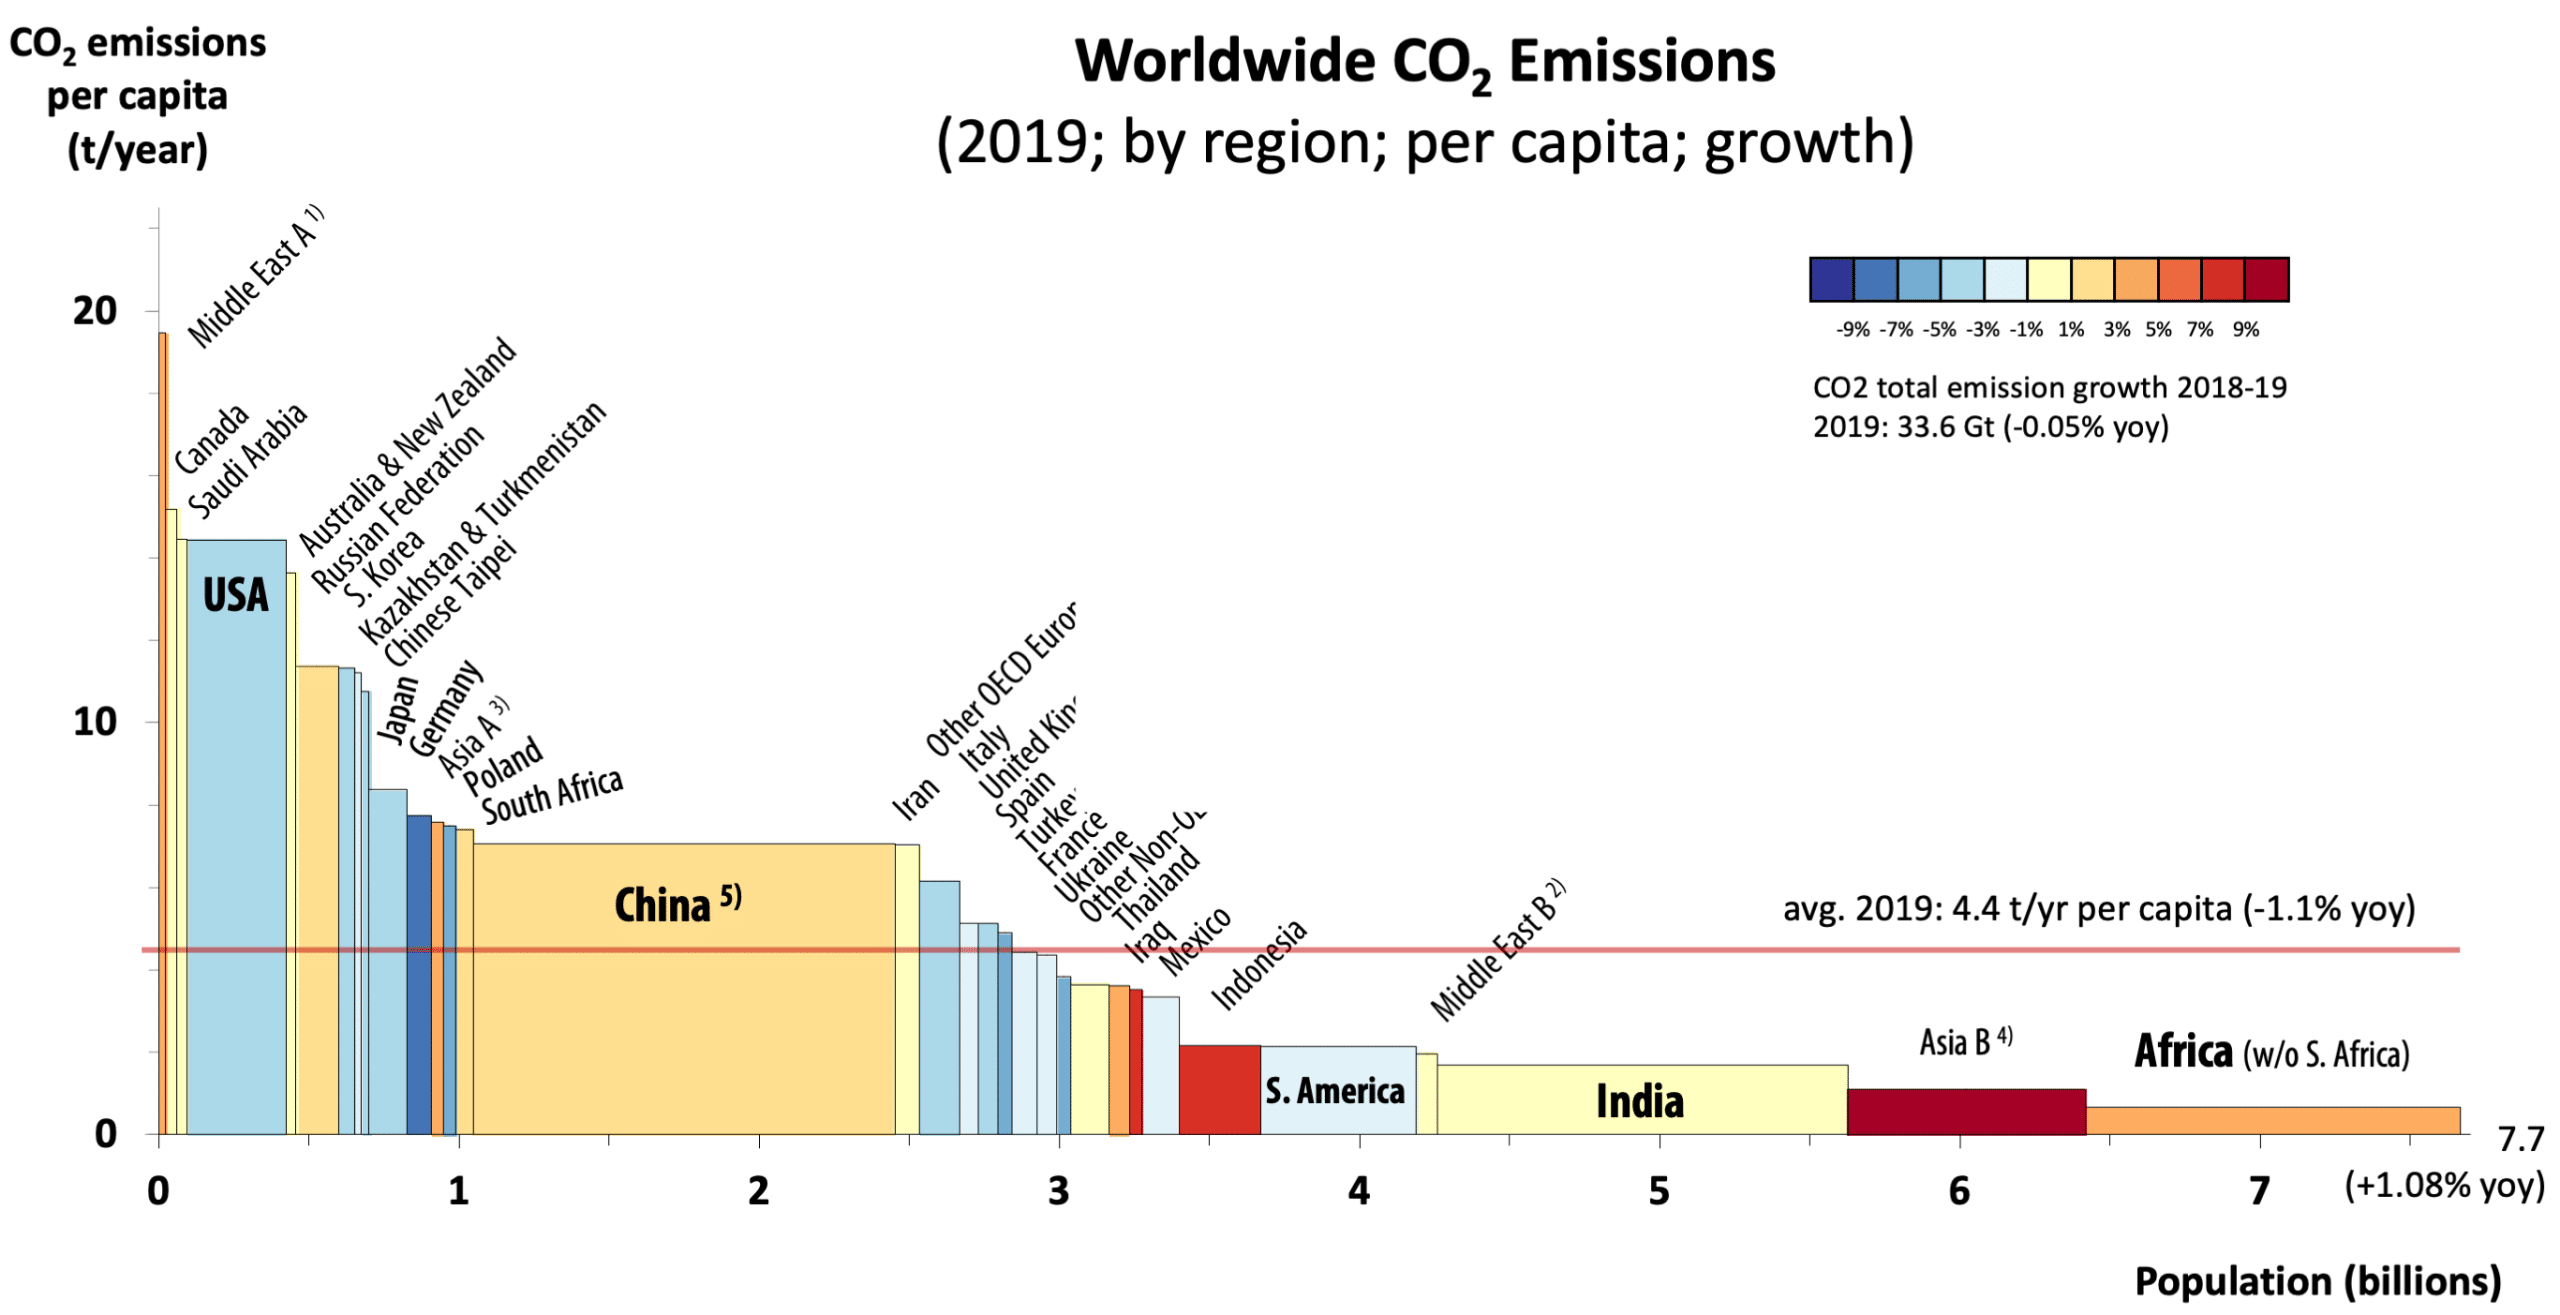 pale Yellowish Humane The Picture of Inequality: CO2 Emissions per Capita and by Country in 2019